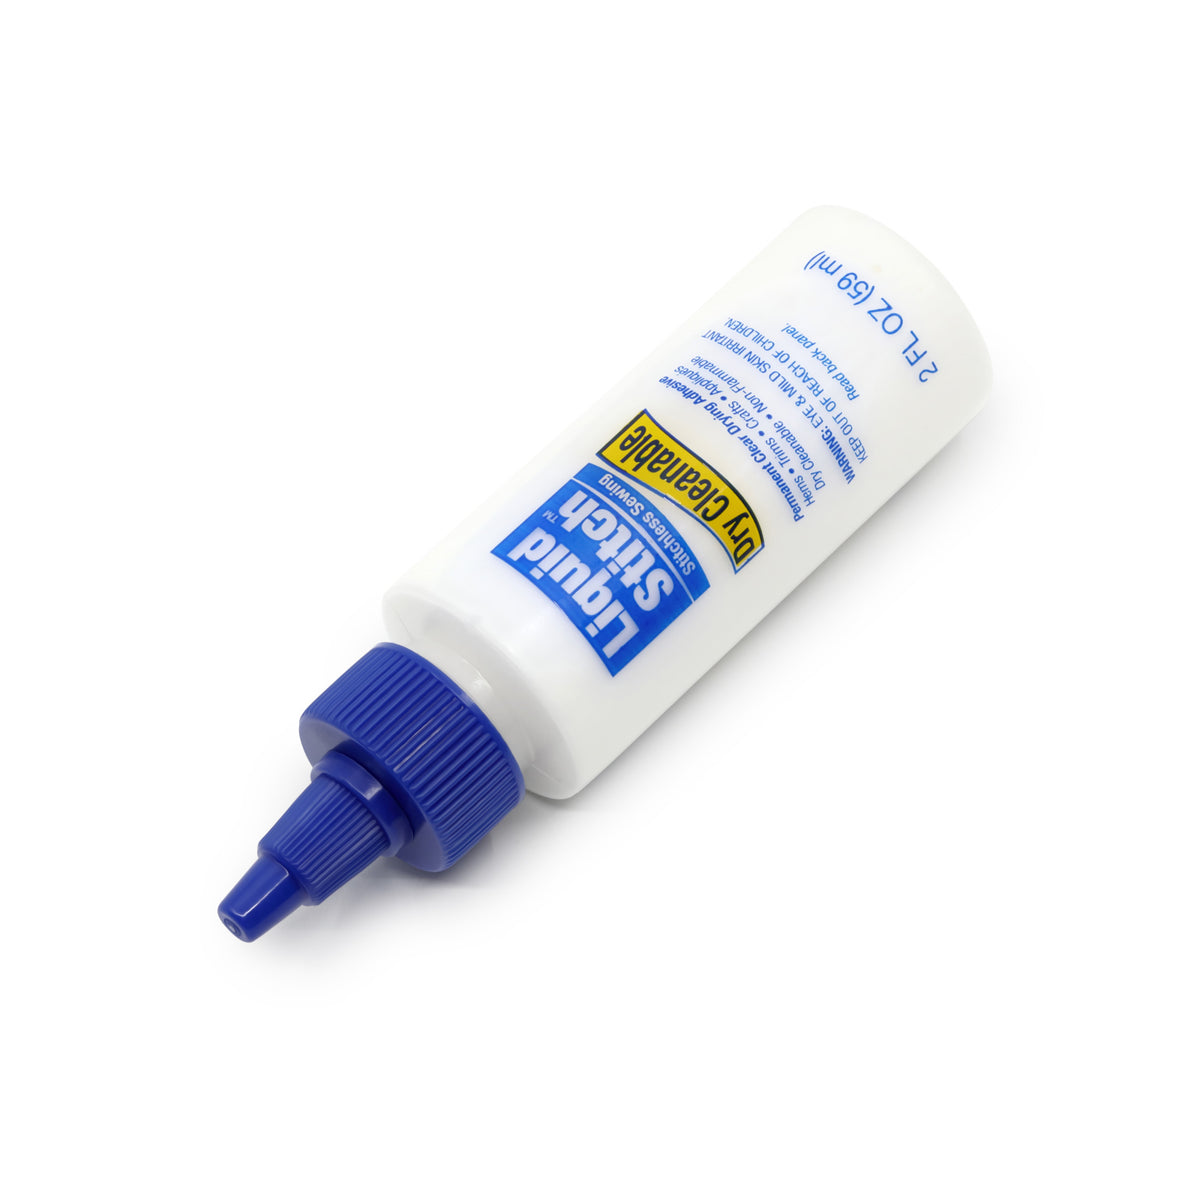 DK5 Glue Remover Cleaning Agent Spray — AllStitch Embroidery Supplies